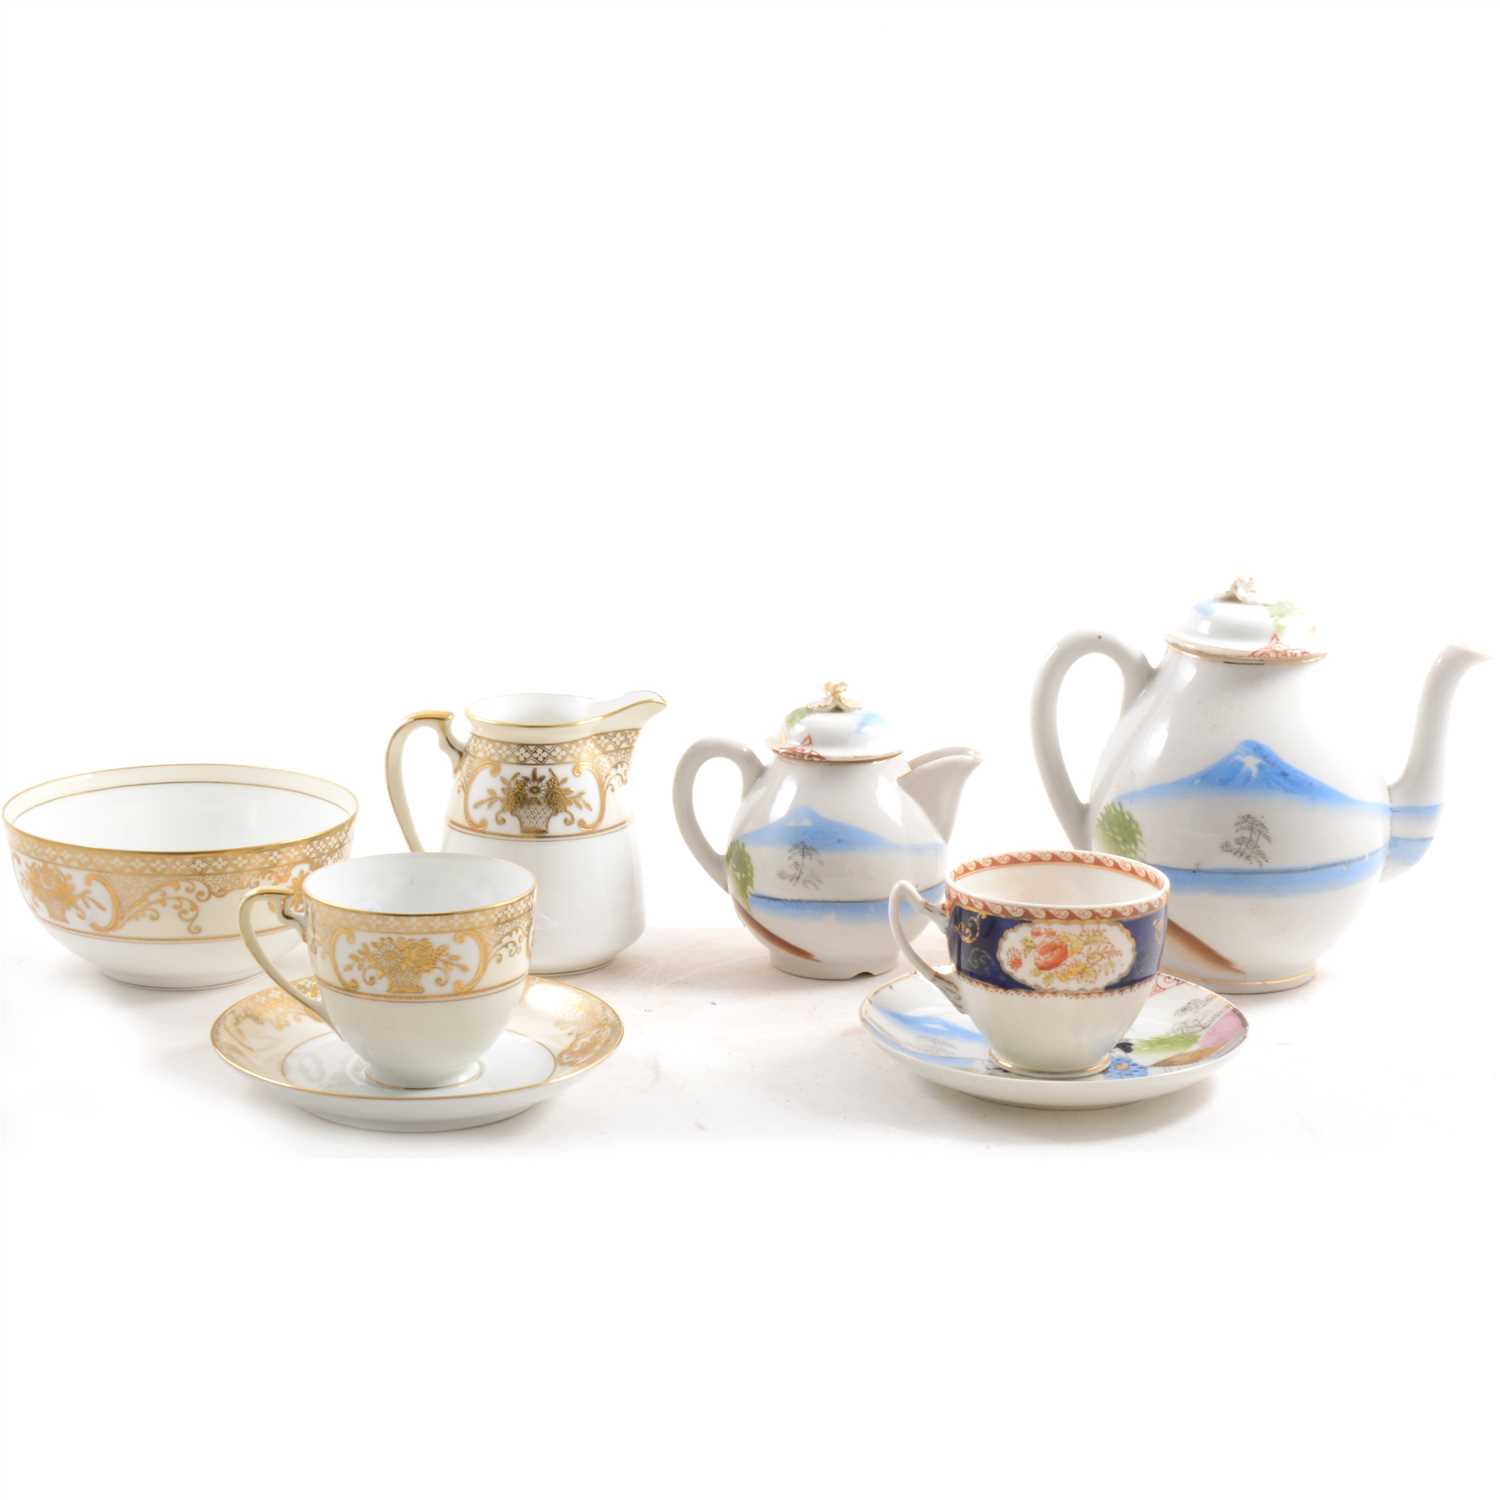 Lot 47 - A Noritake tea service,, another eggshell porcelain service, and a Staffordshire part service